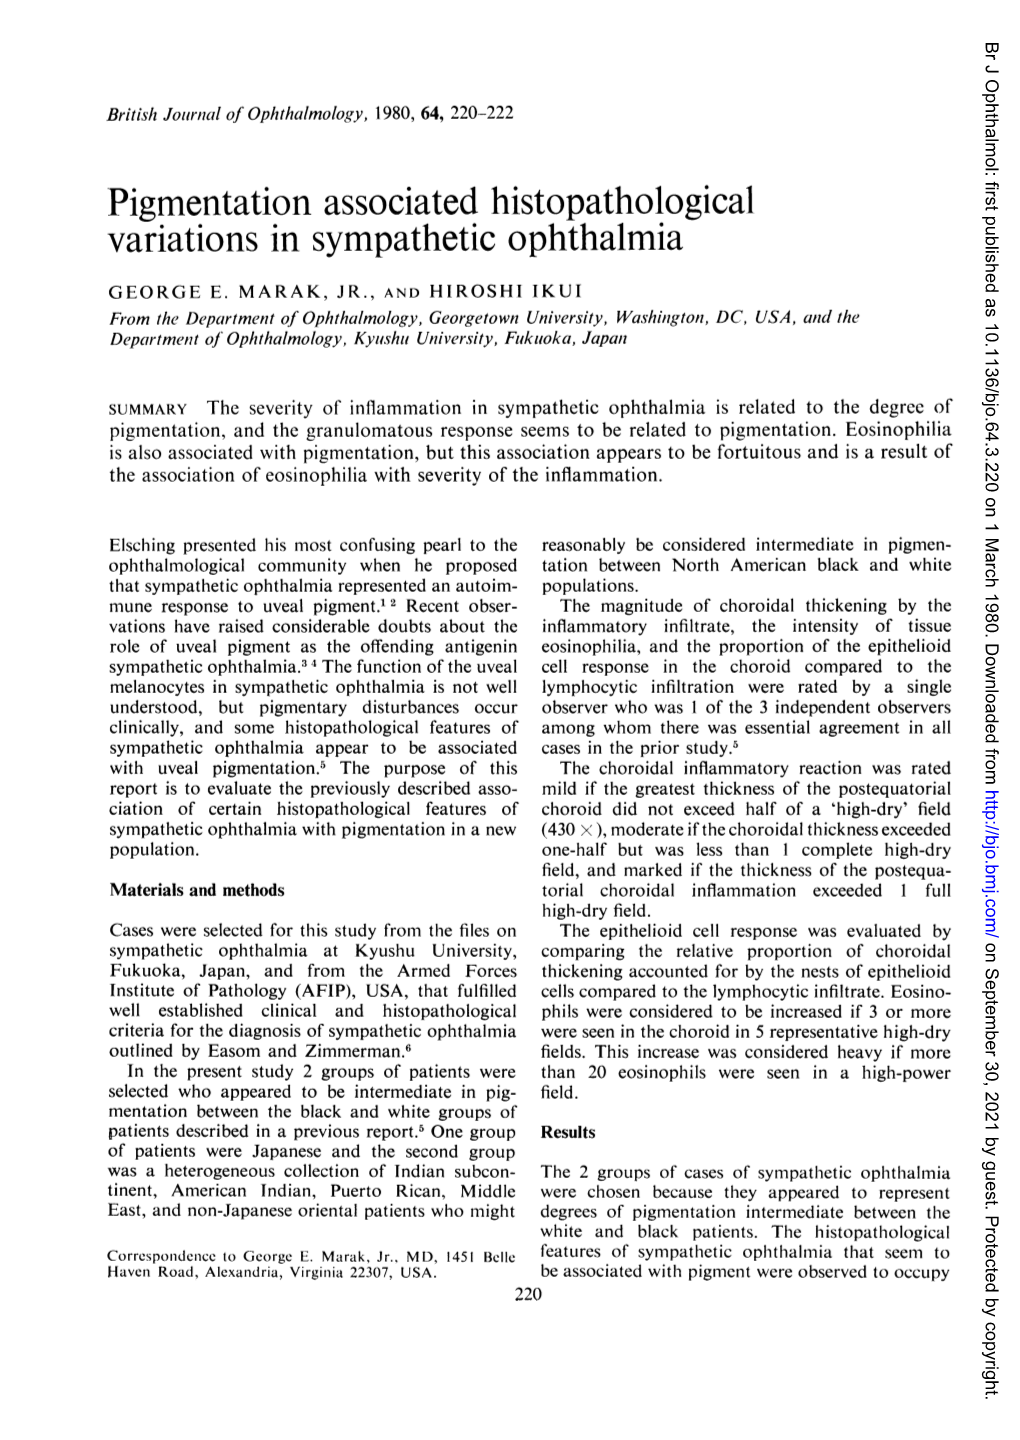 Pigmentation Associated Histopathological Variations in Sympathetic Ophthalmia